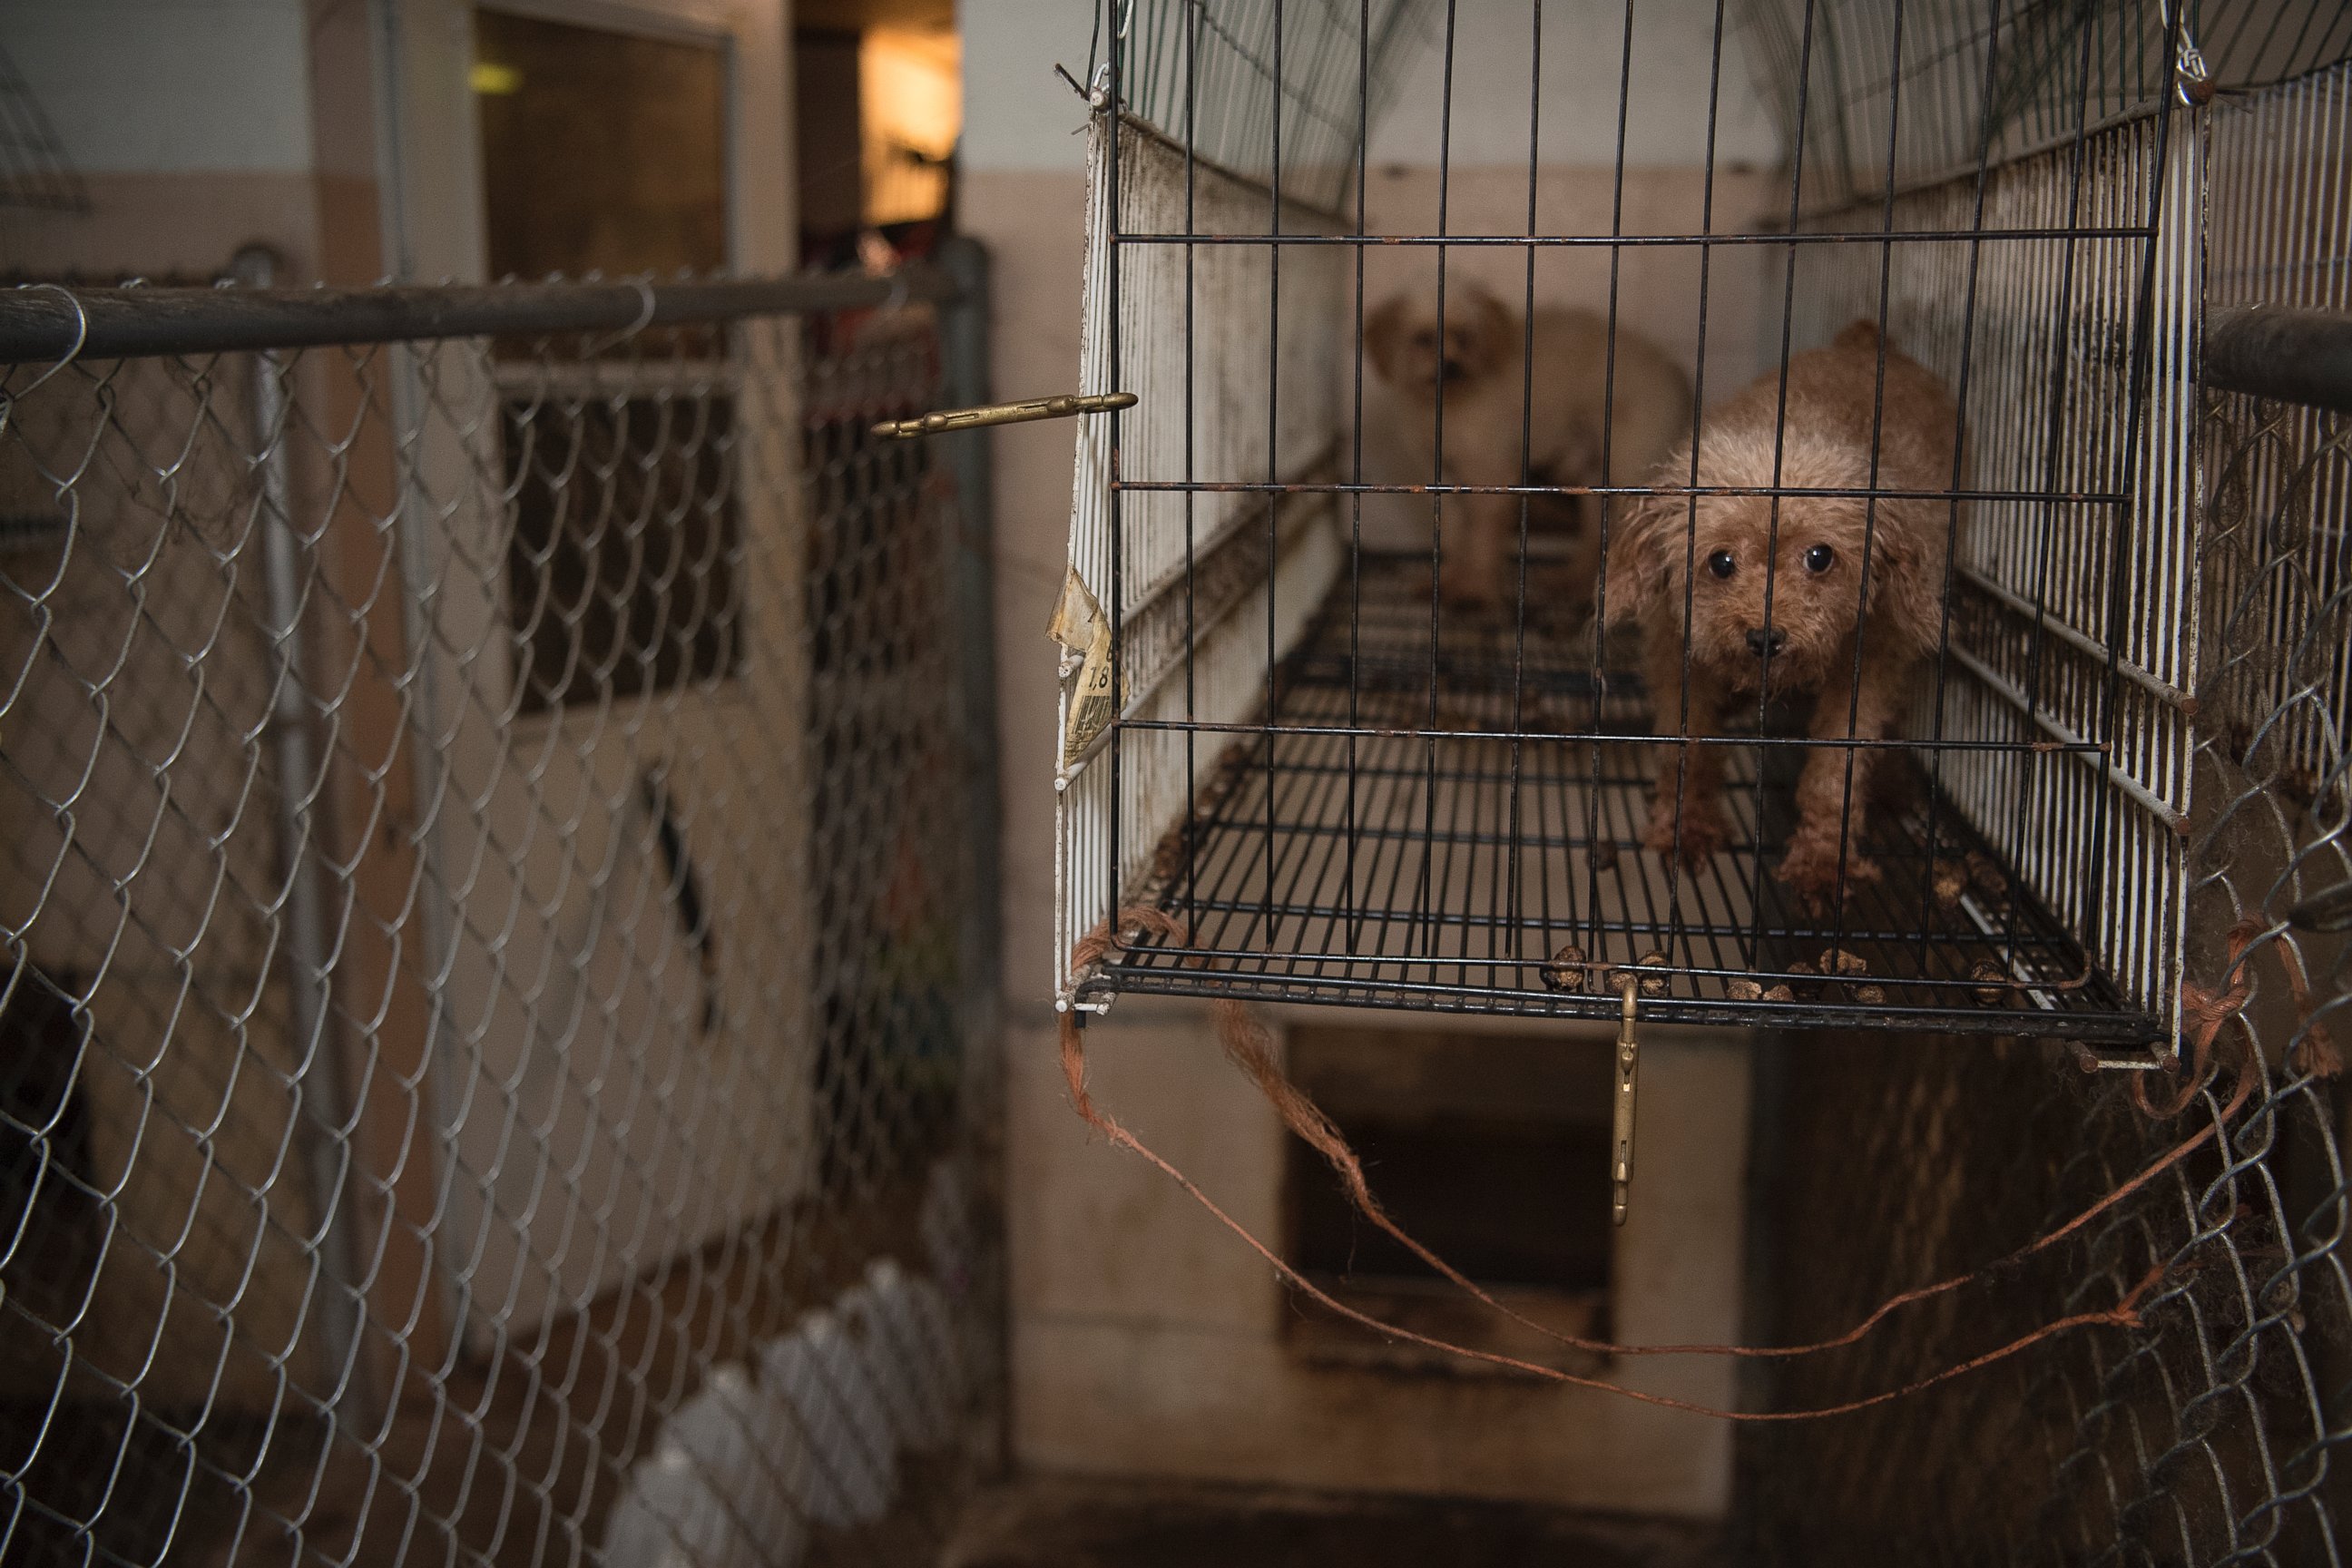 PHOTO: Nearly 130 animals were rescued from a suspected puppy mill in Cabarrus County, North Carolina, on Sept. 26, 2016, according to the Cabarrus County Sheriff's Office and The Humane Society of the United States. 